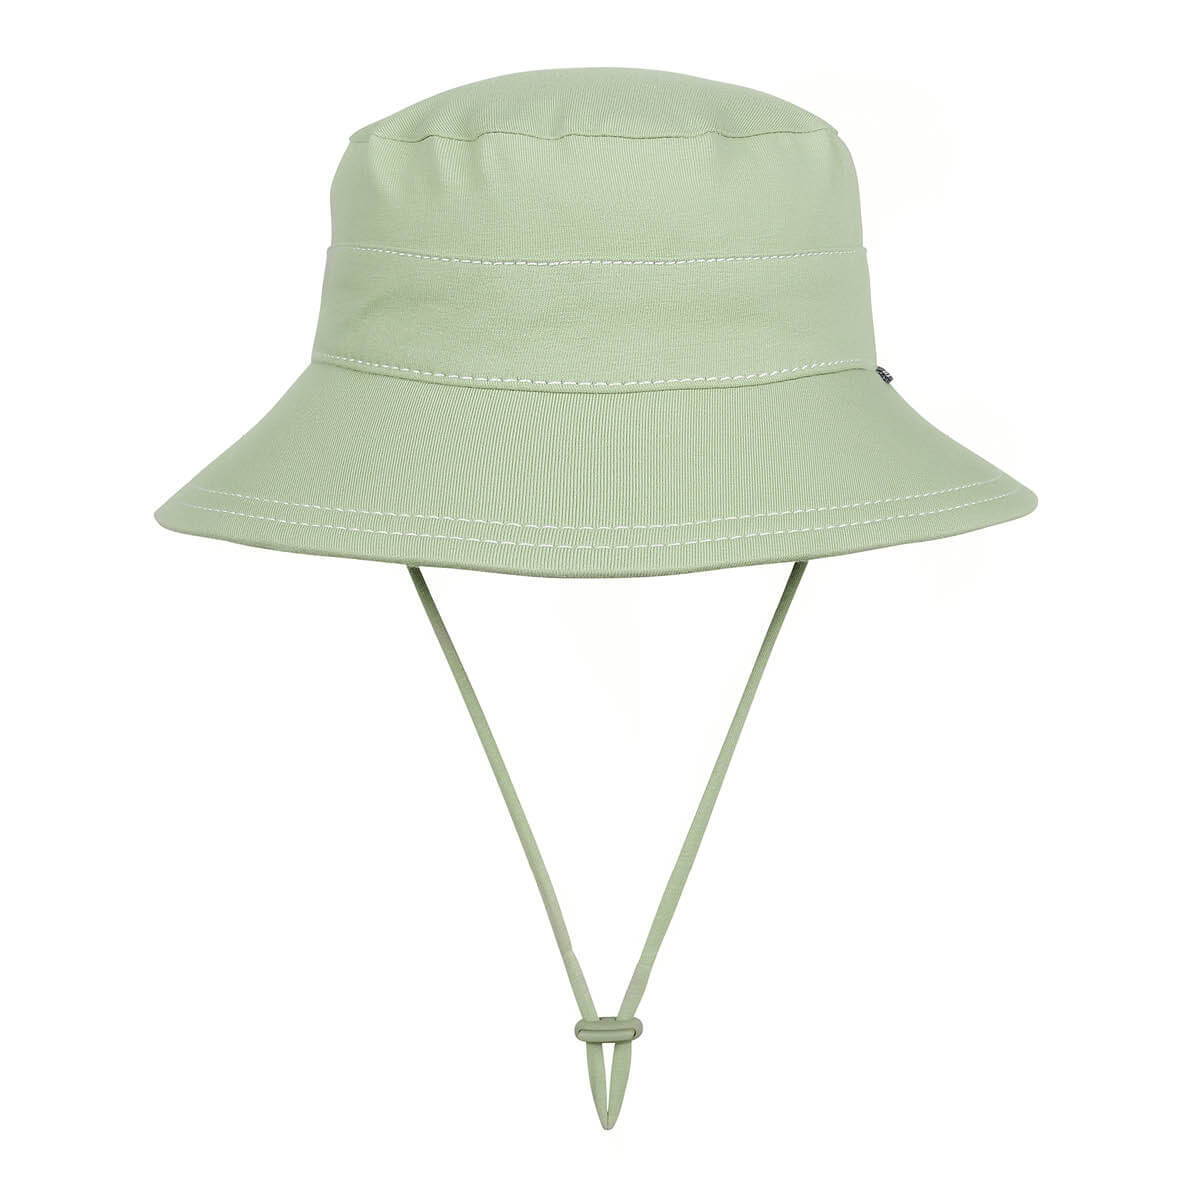 Bedhead hats - KHAKI Bucket Hat with Strap for girls, boys & baby ...